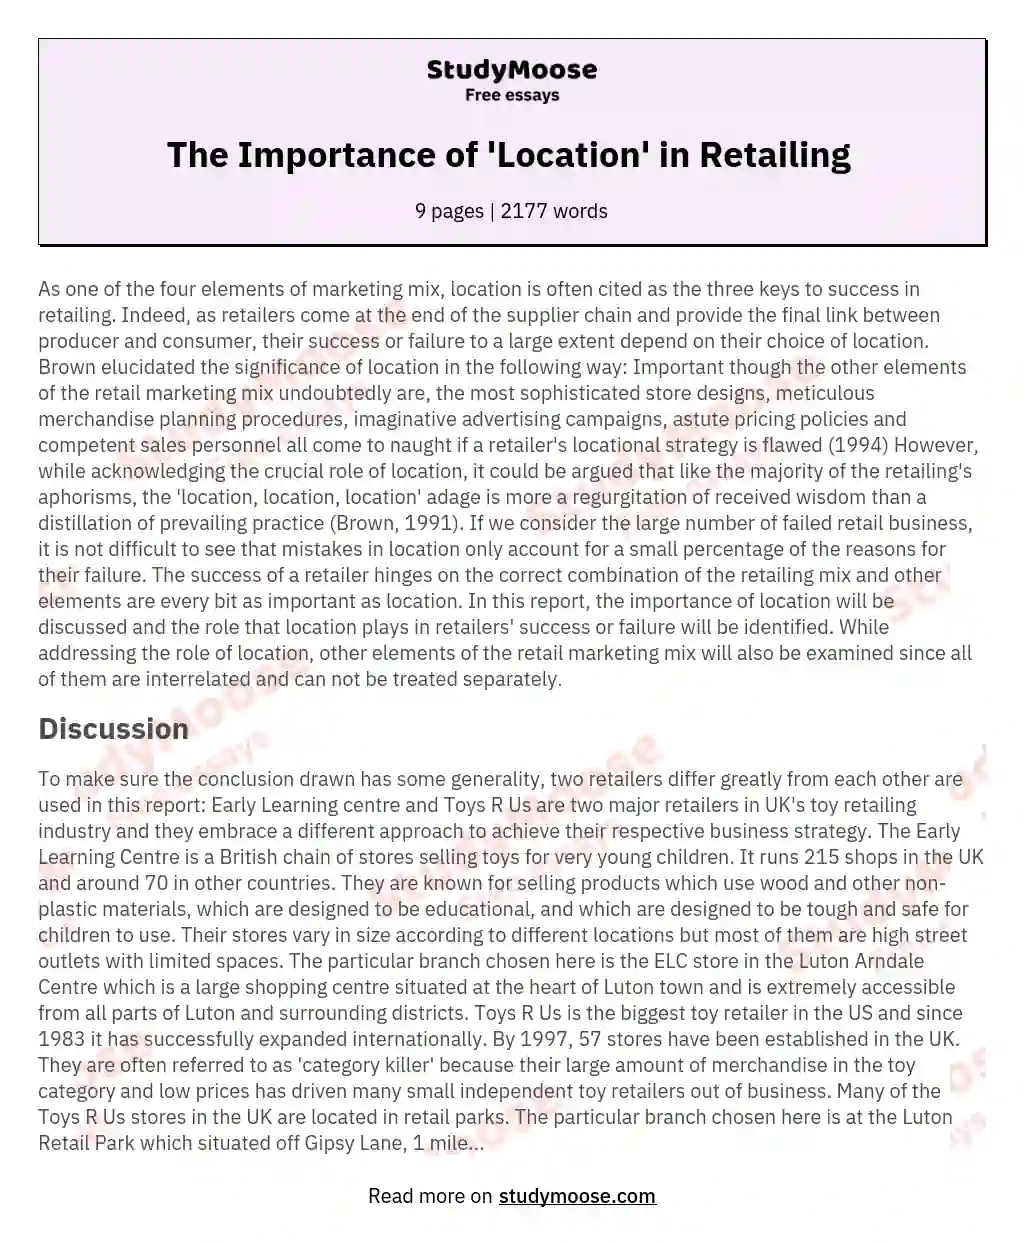 The Importance of 'Location' in Retailing  essay